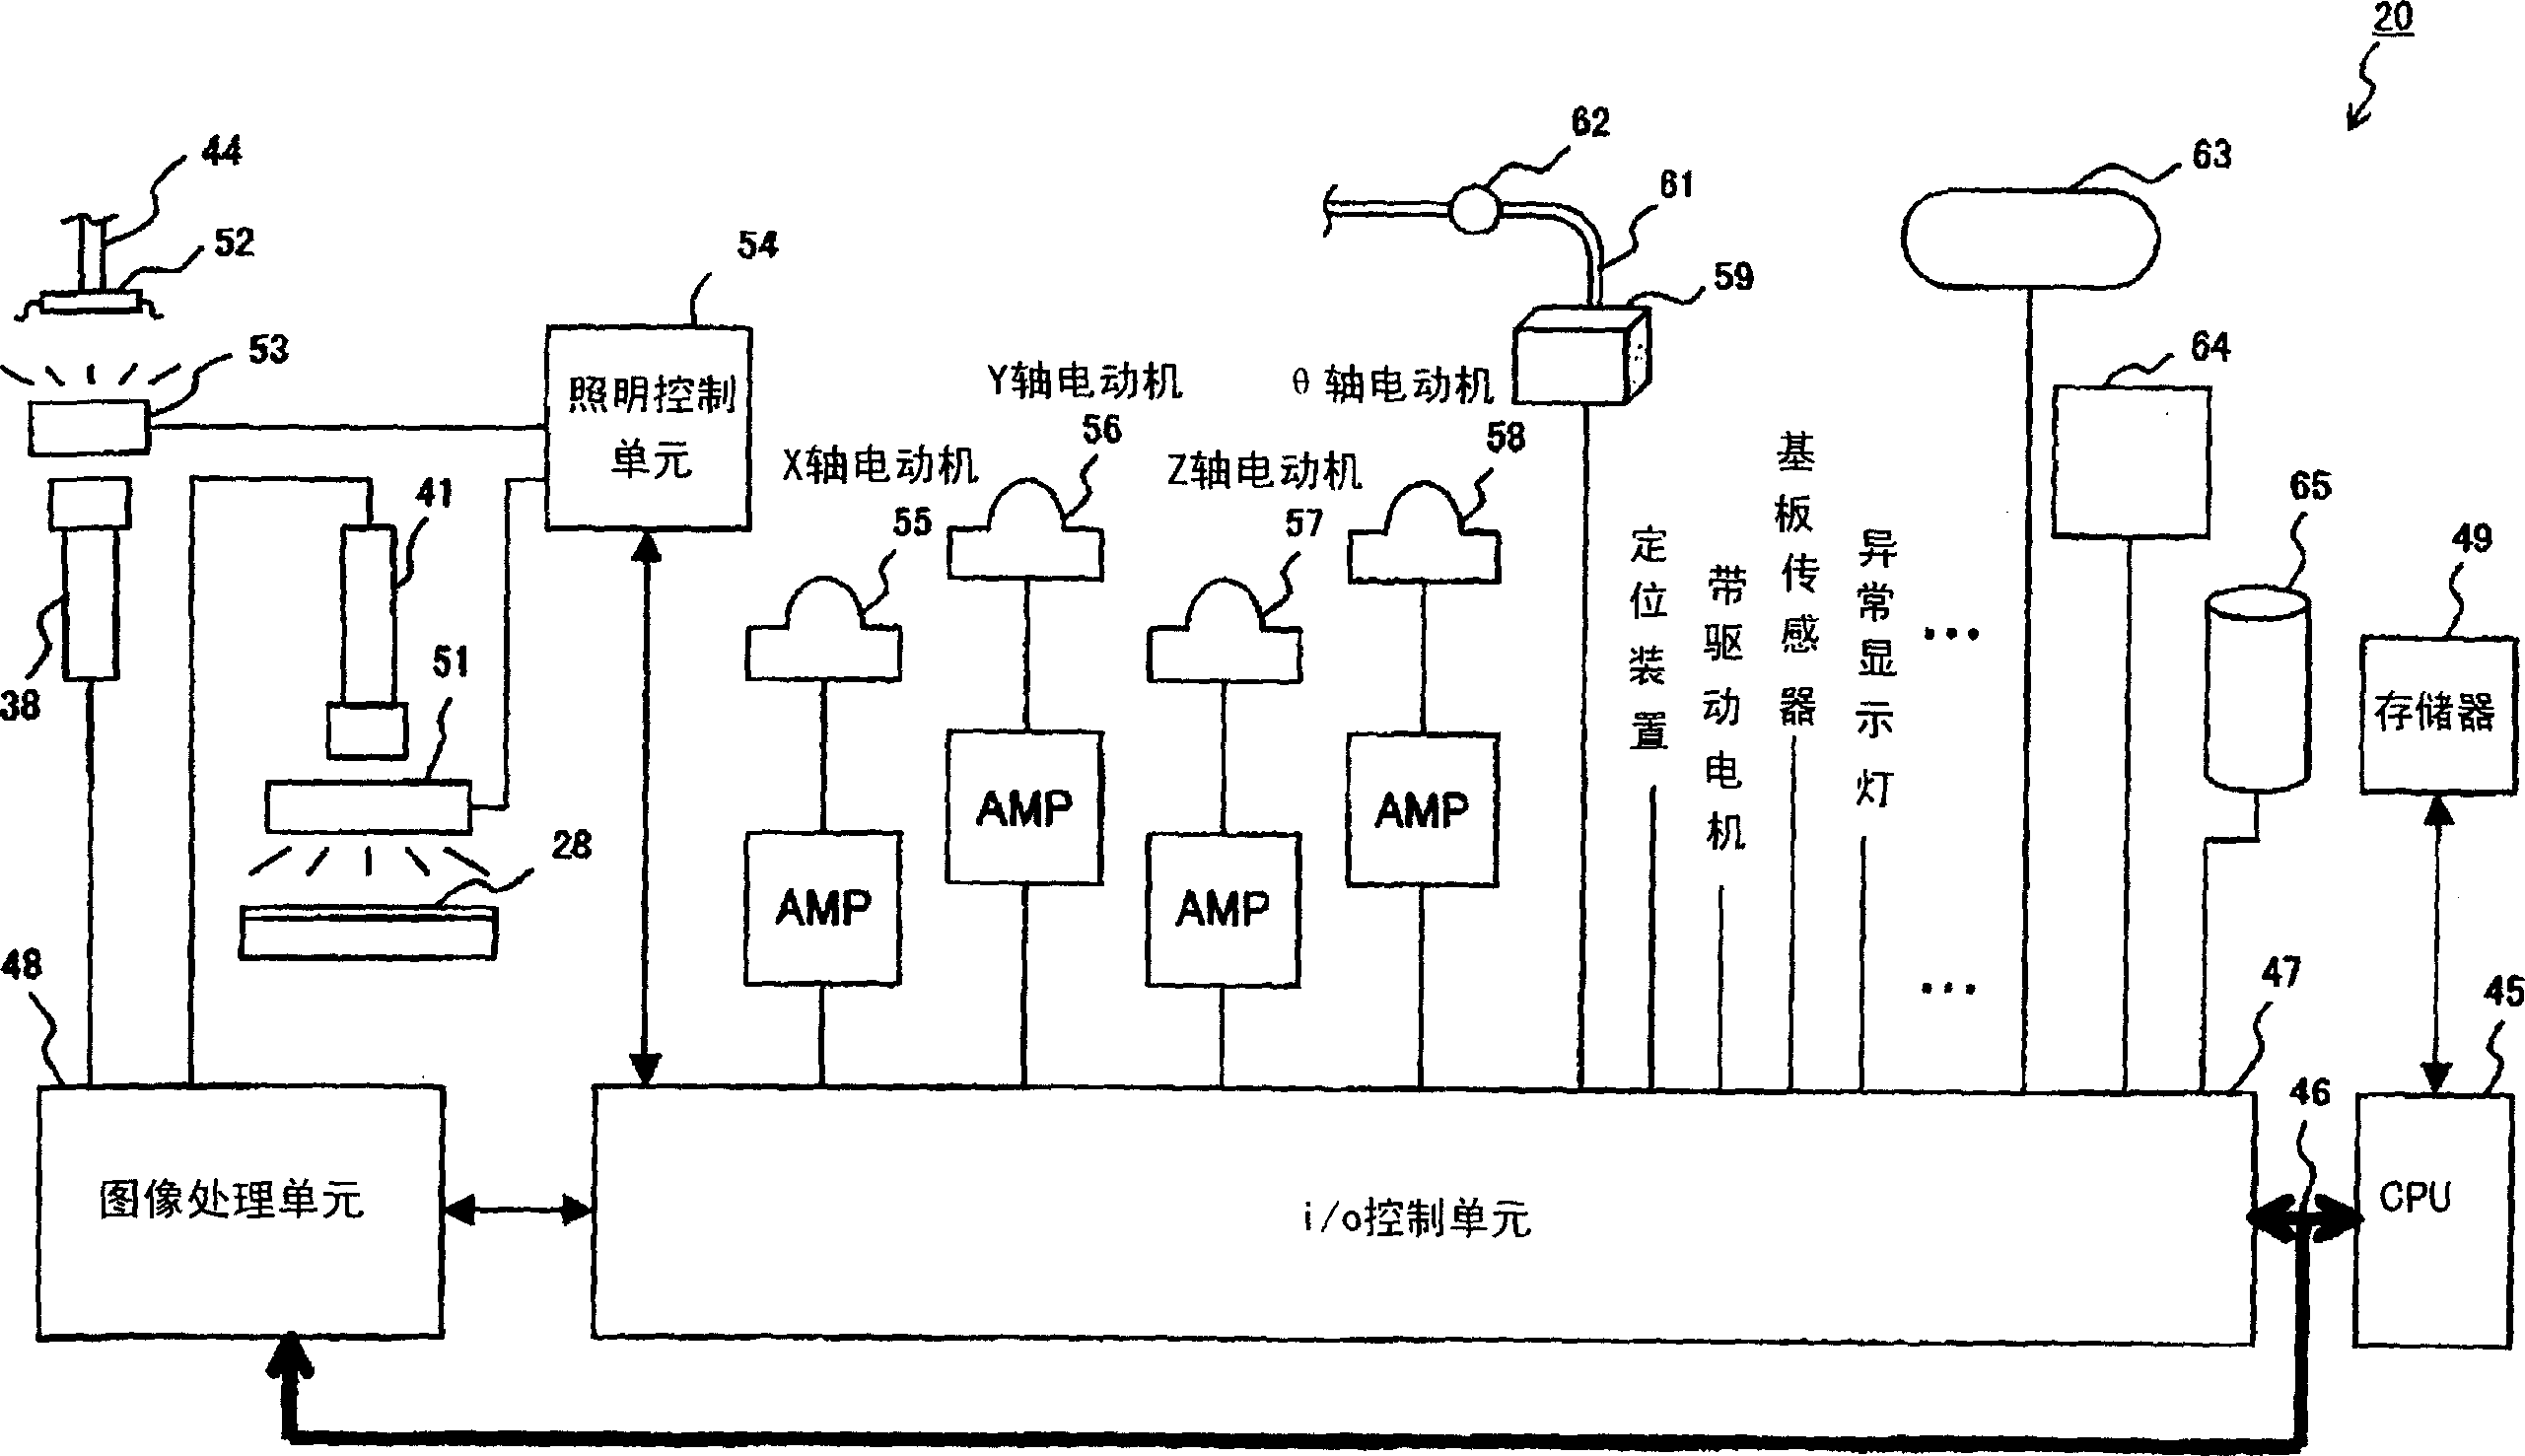 Image data generation method and element installation apparatus using the same